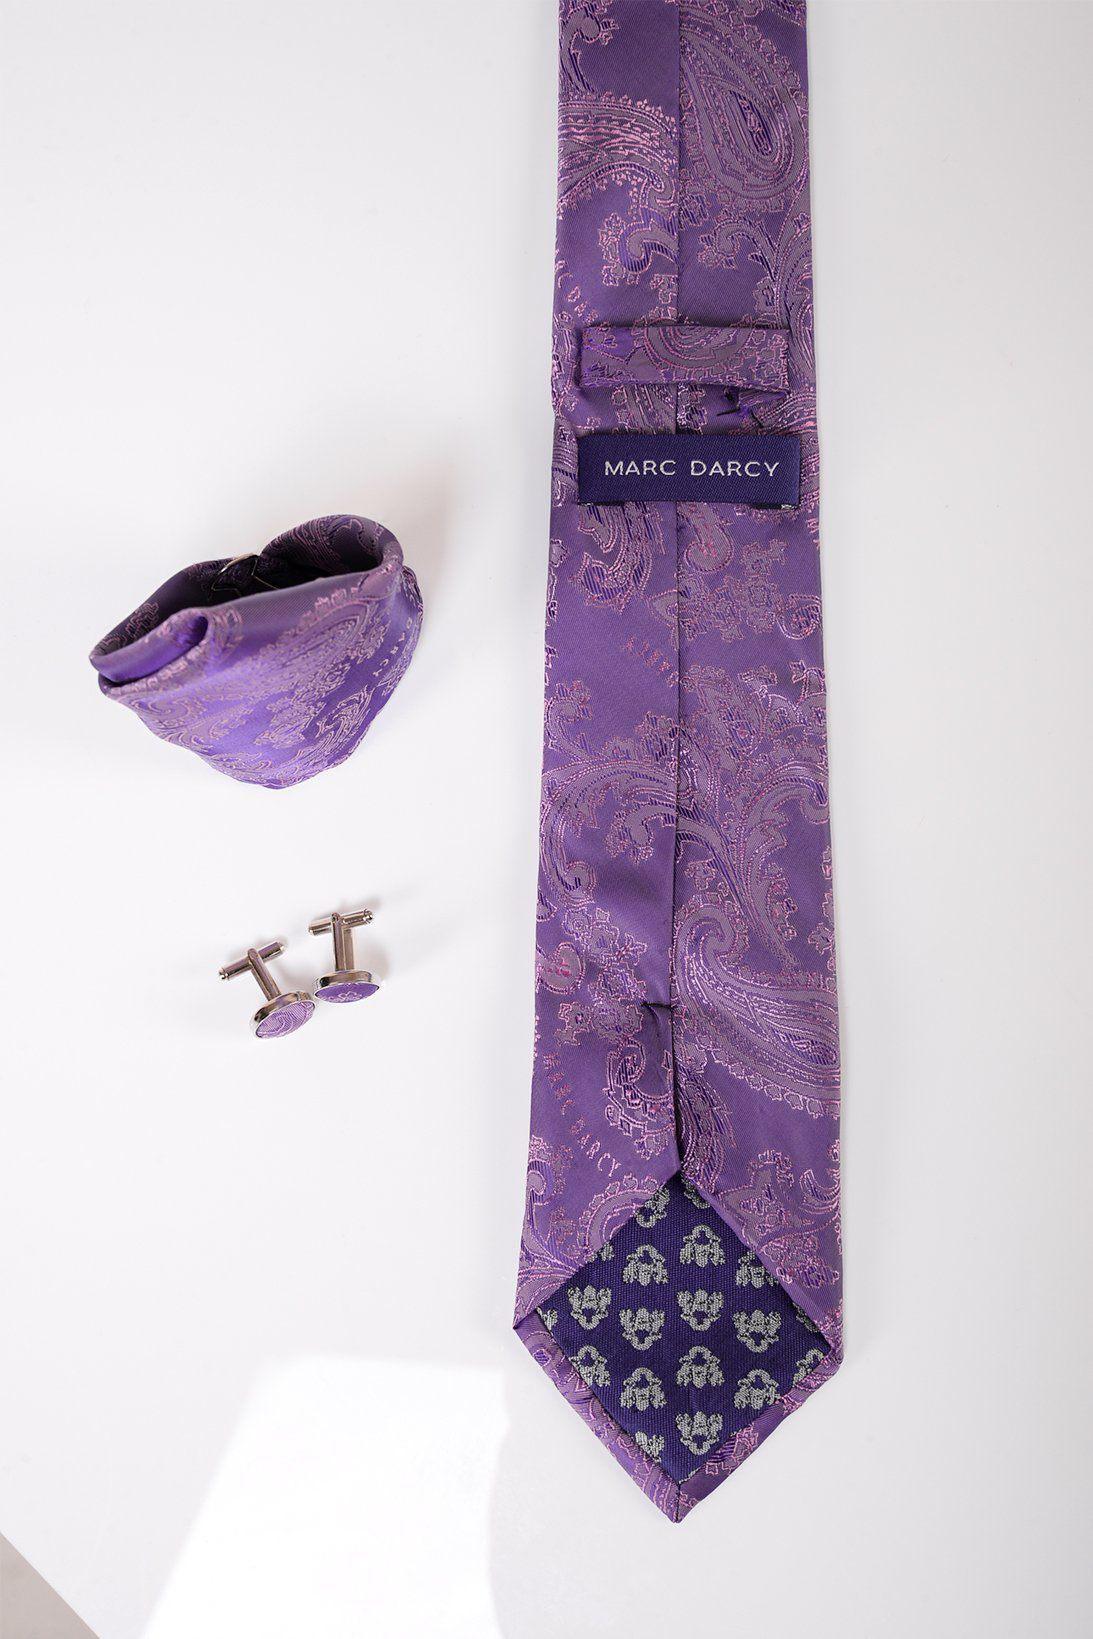 Marc Darcy MD Paisley Tie and Pocket Square Set Purple